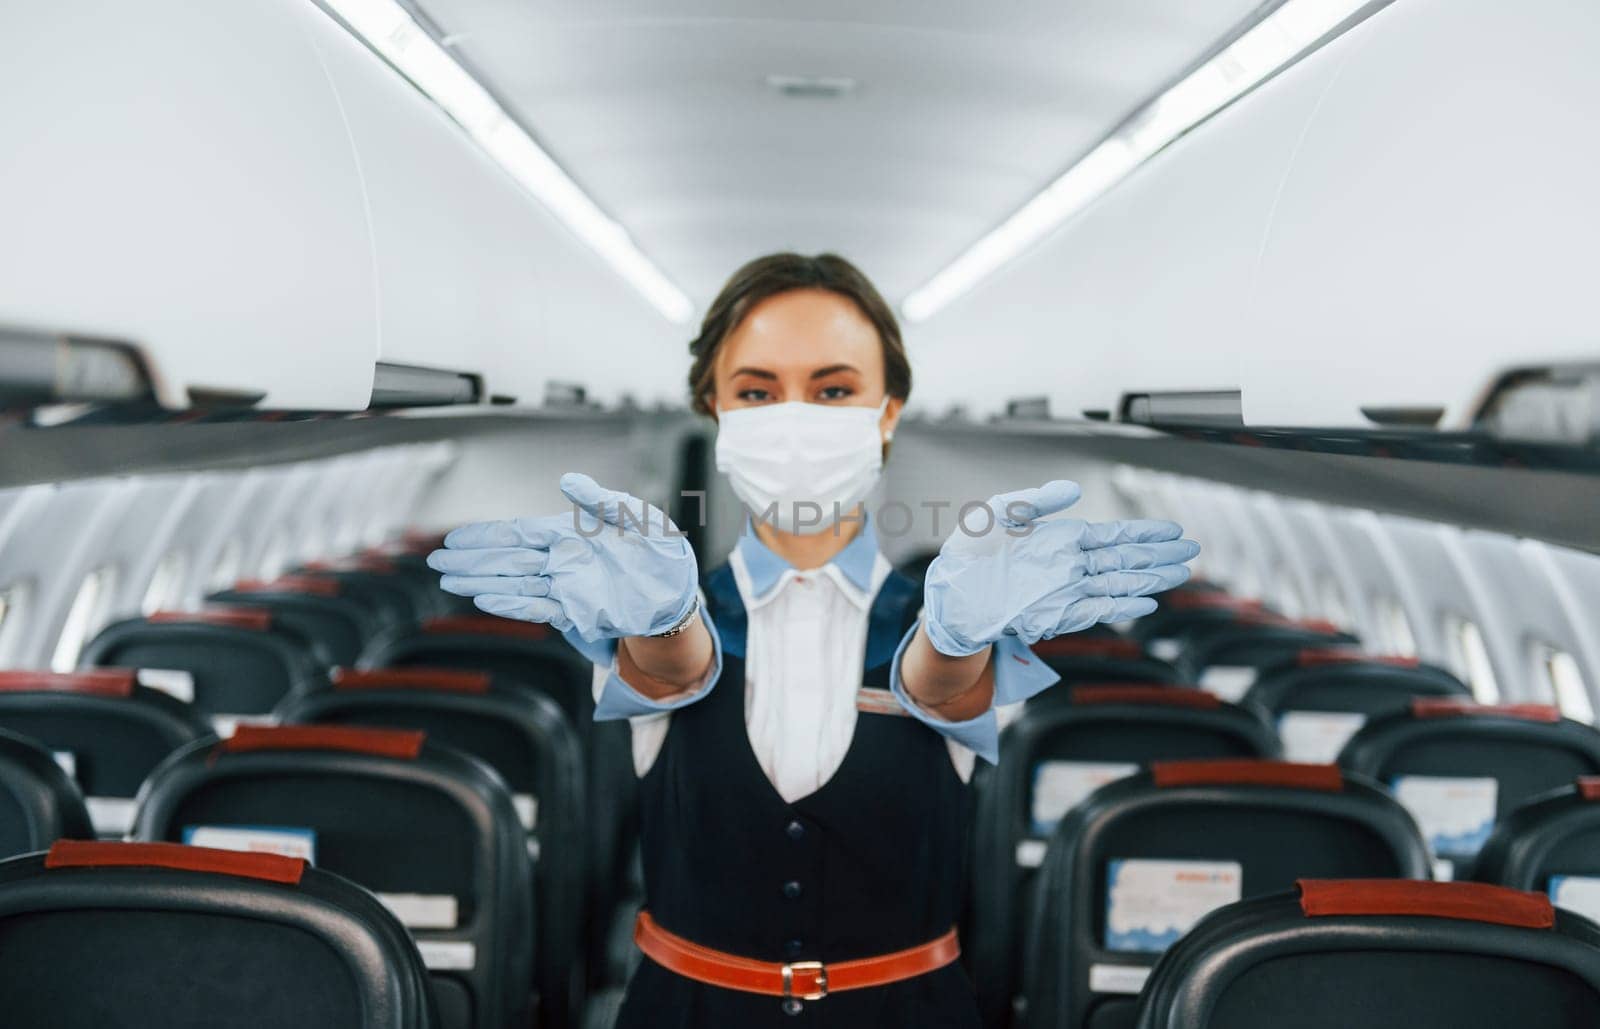 In protective gloves and mask. Young stewardess on the work in the passanger airplane.